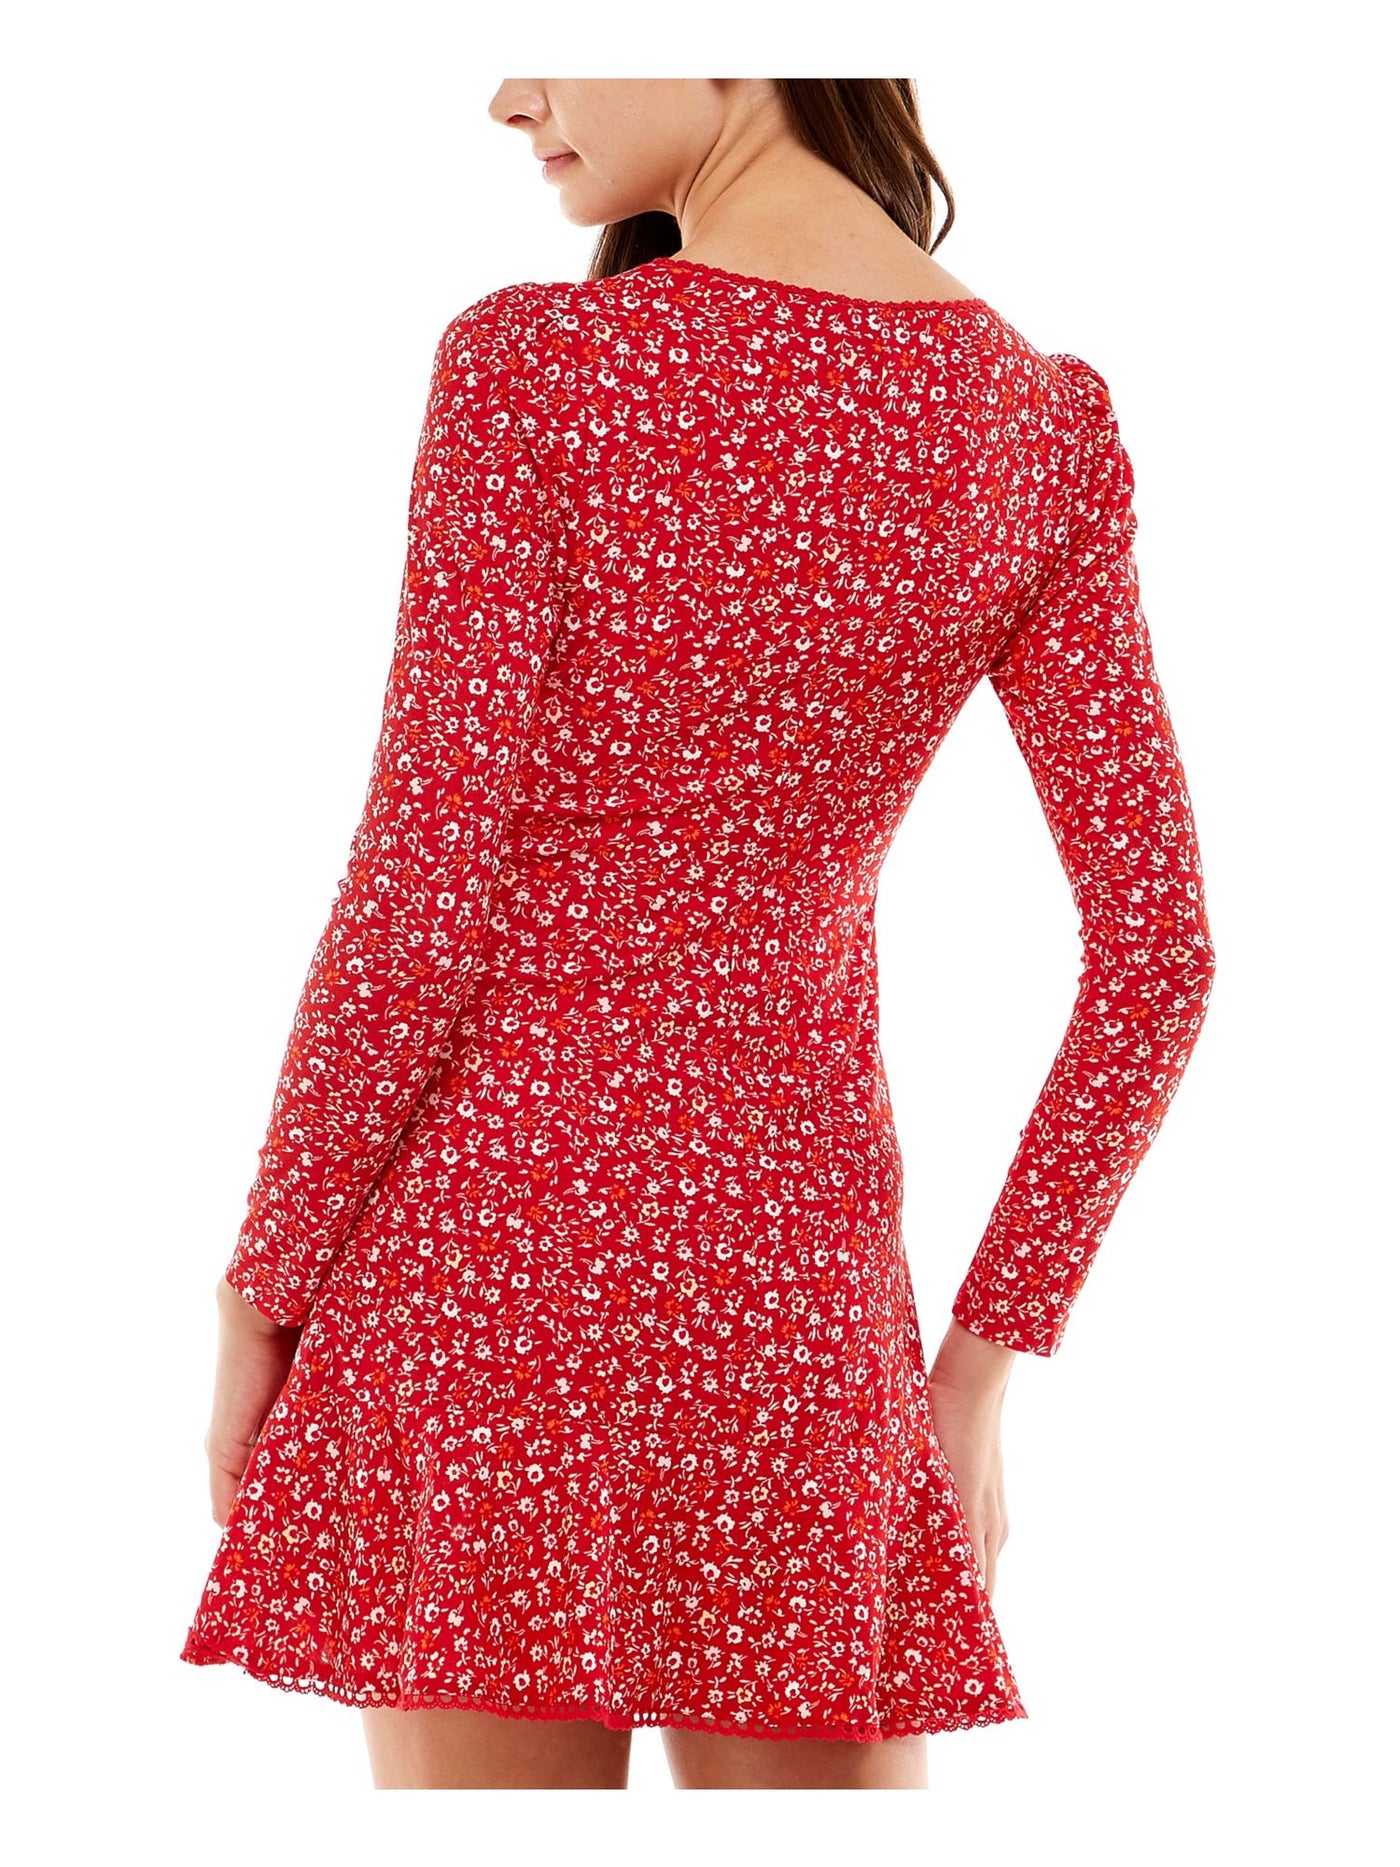 CITY STUDIO Womens Red Fitted Lined Lace Trim Floral Long Sleeve Surplice Neckline Mini Party Fit + Flare Dress Juniors XXS